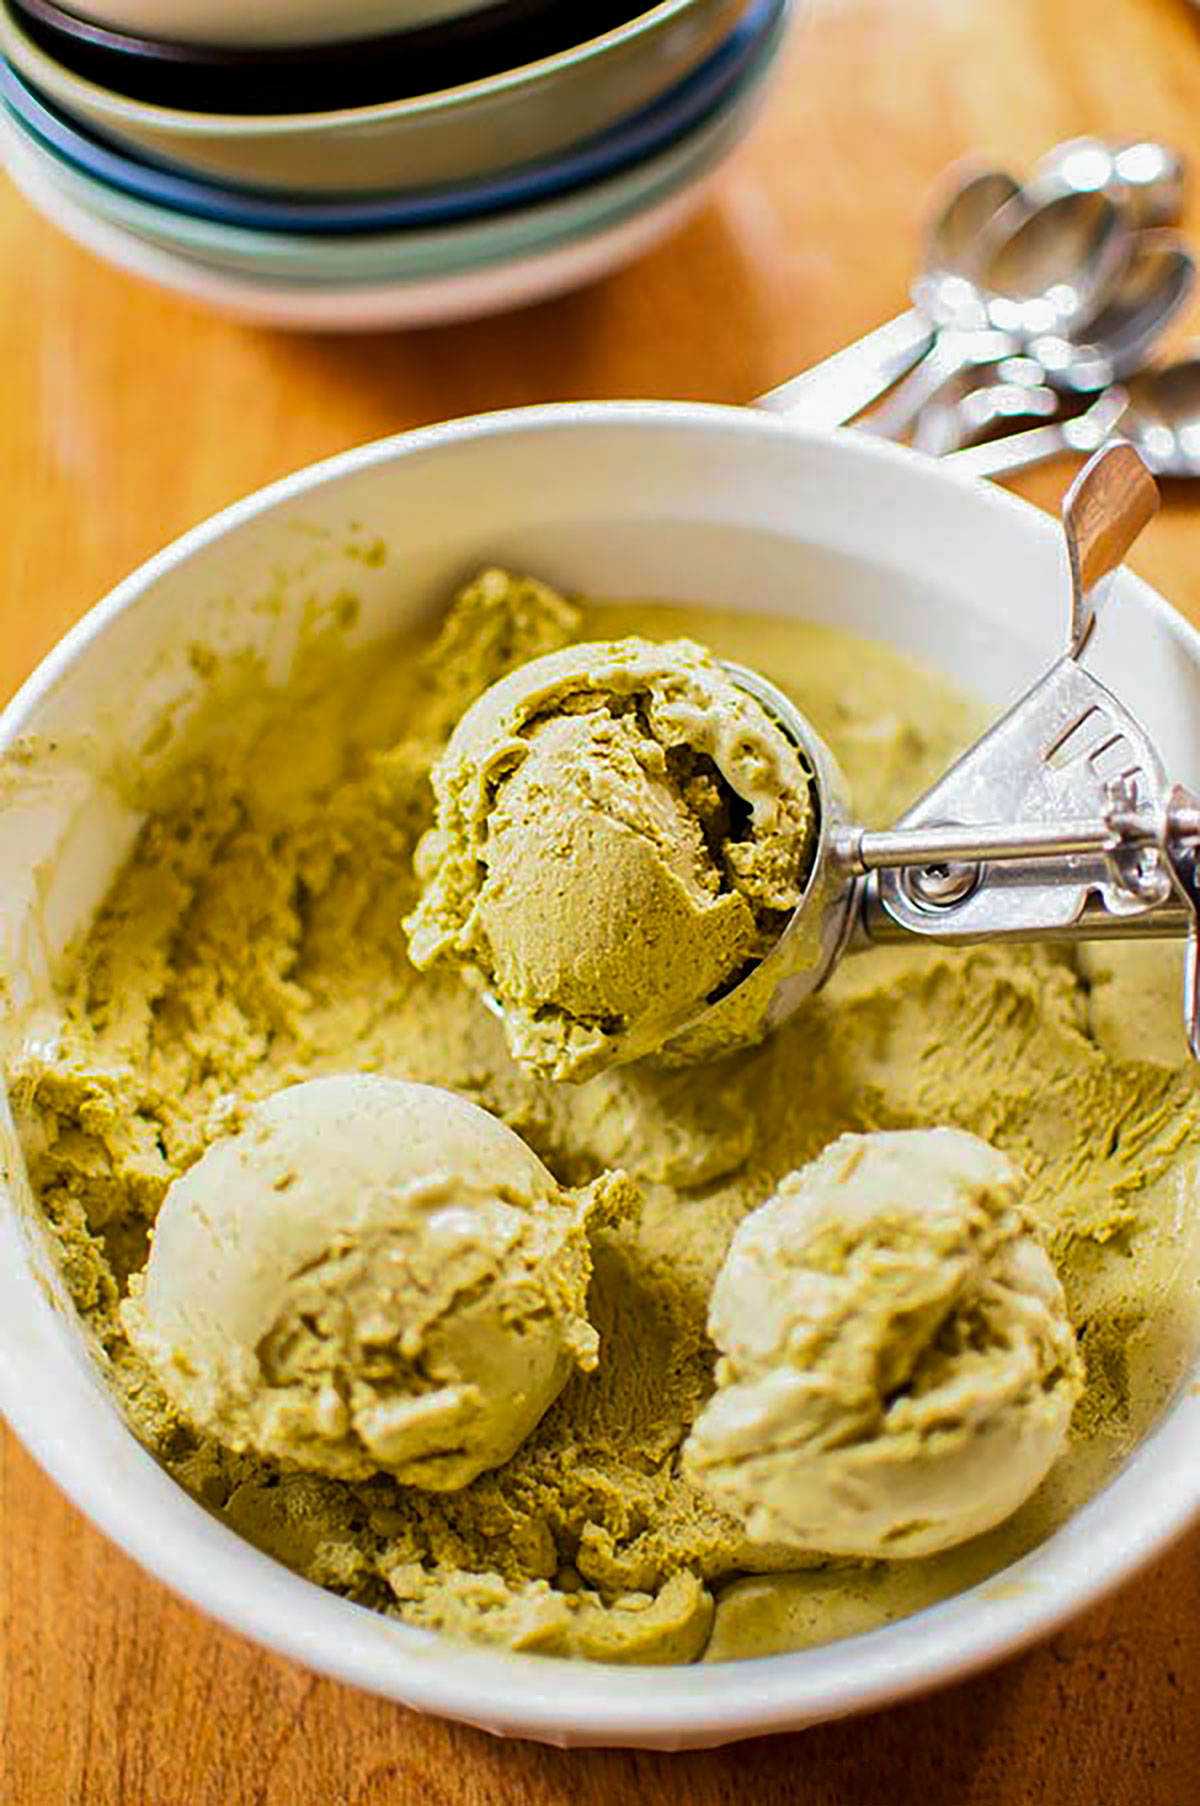 Matcha ice cream scoops in a bowl